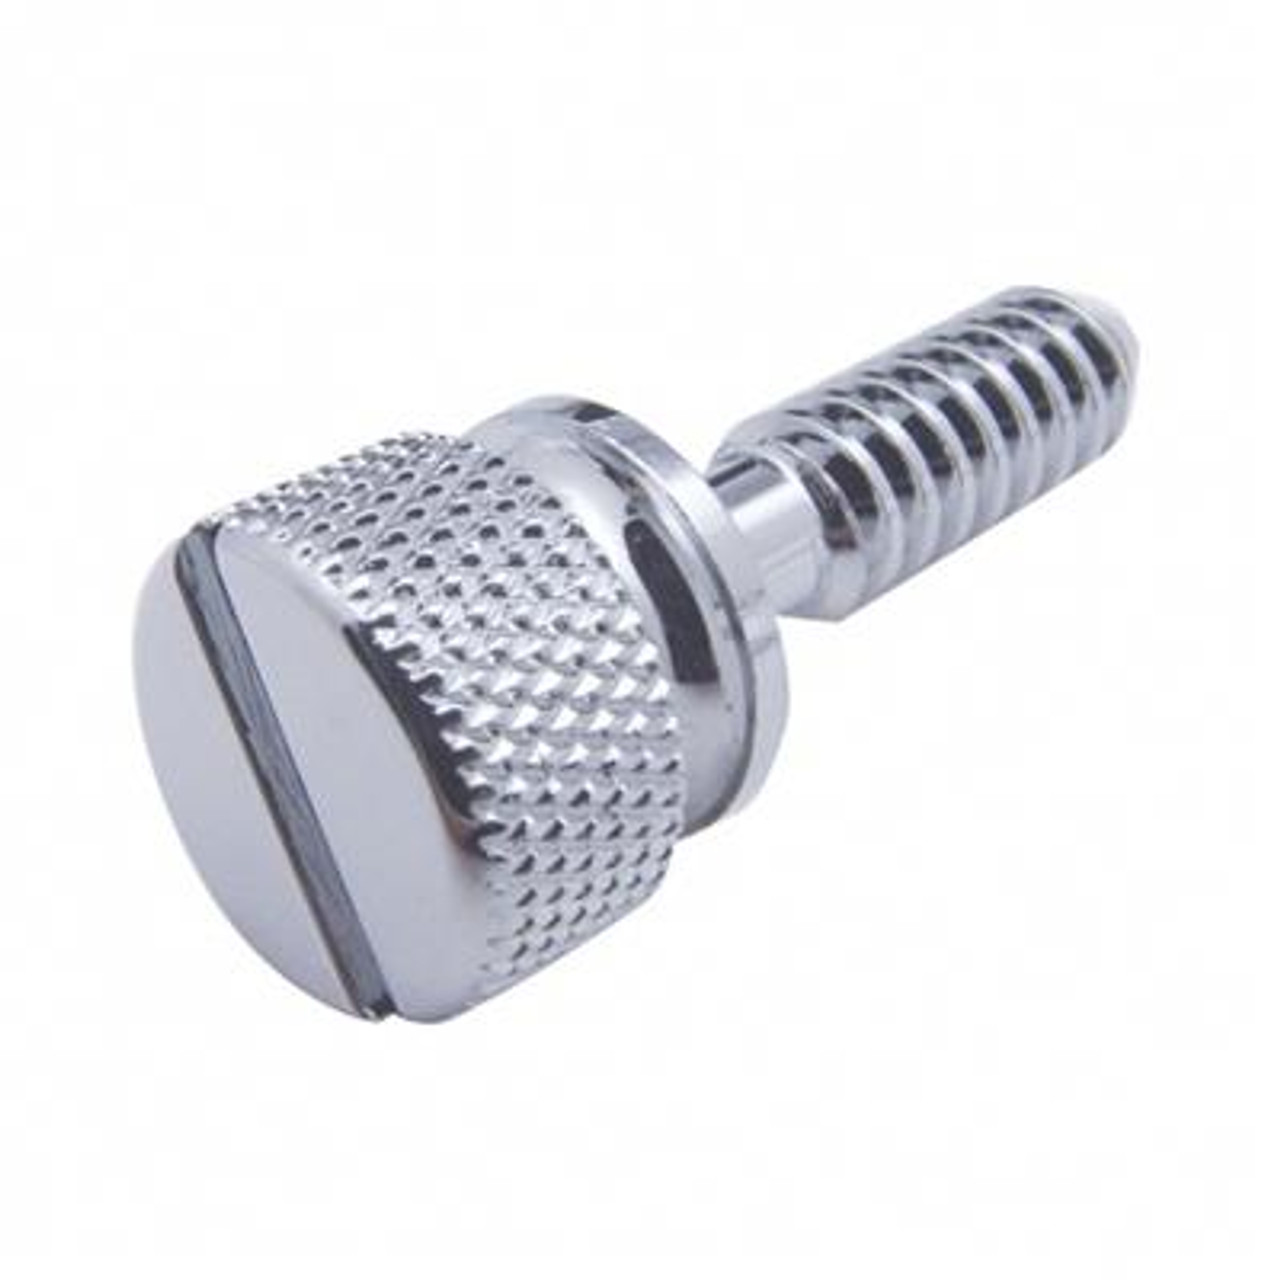 We carry a variety of knobs for fan/air, lights, panel lights, radios, timers, washers, and wipers. Dash screws with your color of choice Swarovski crystal diamonds for Peterbilt, Kenworth, Freightliner, and International trucks are available.